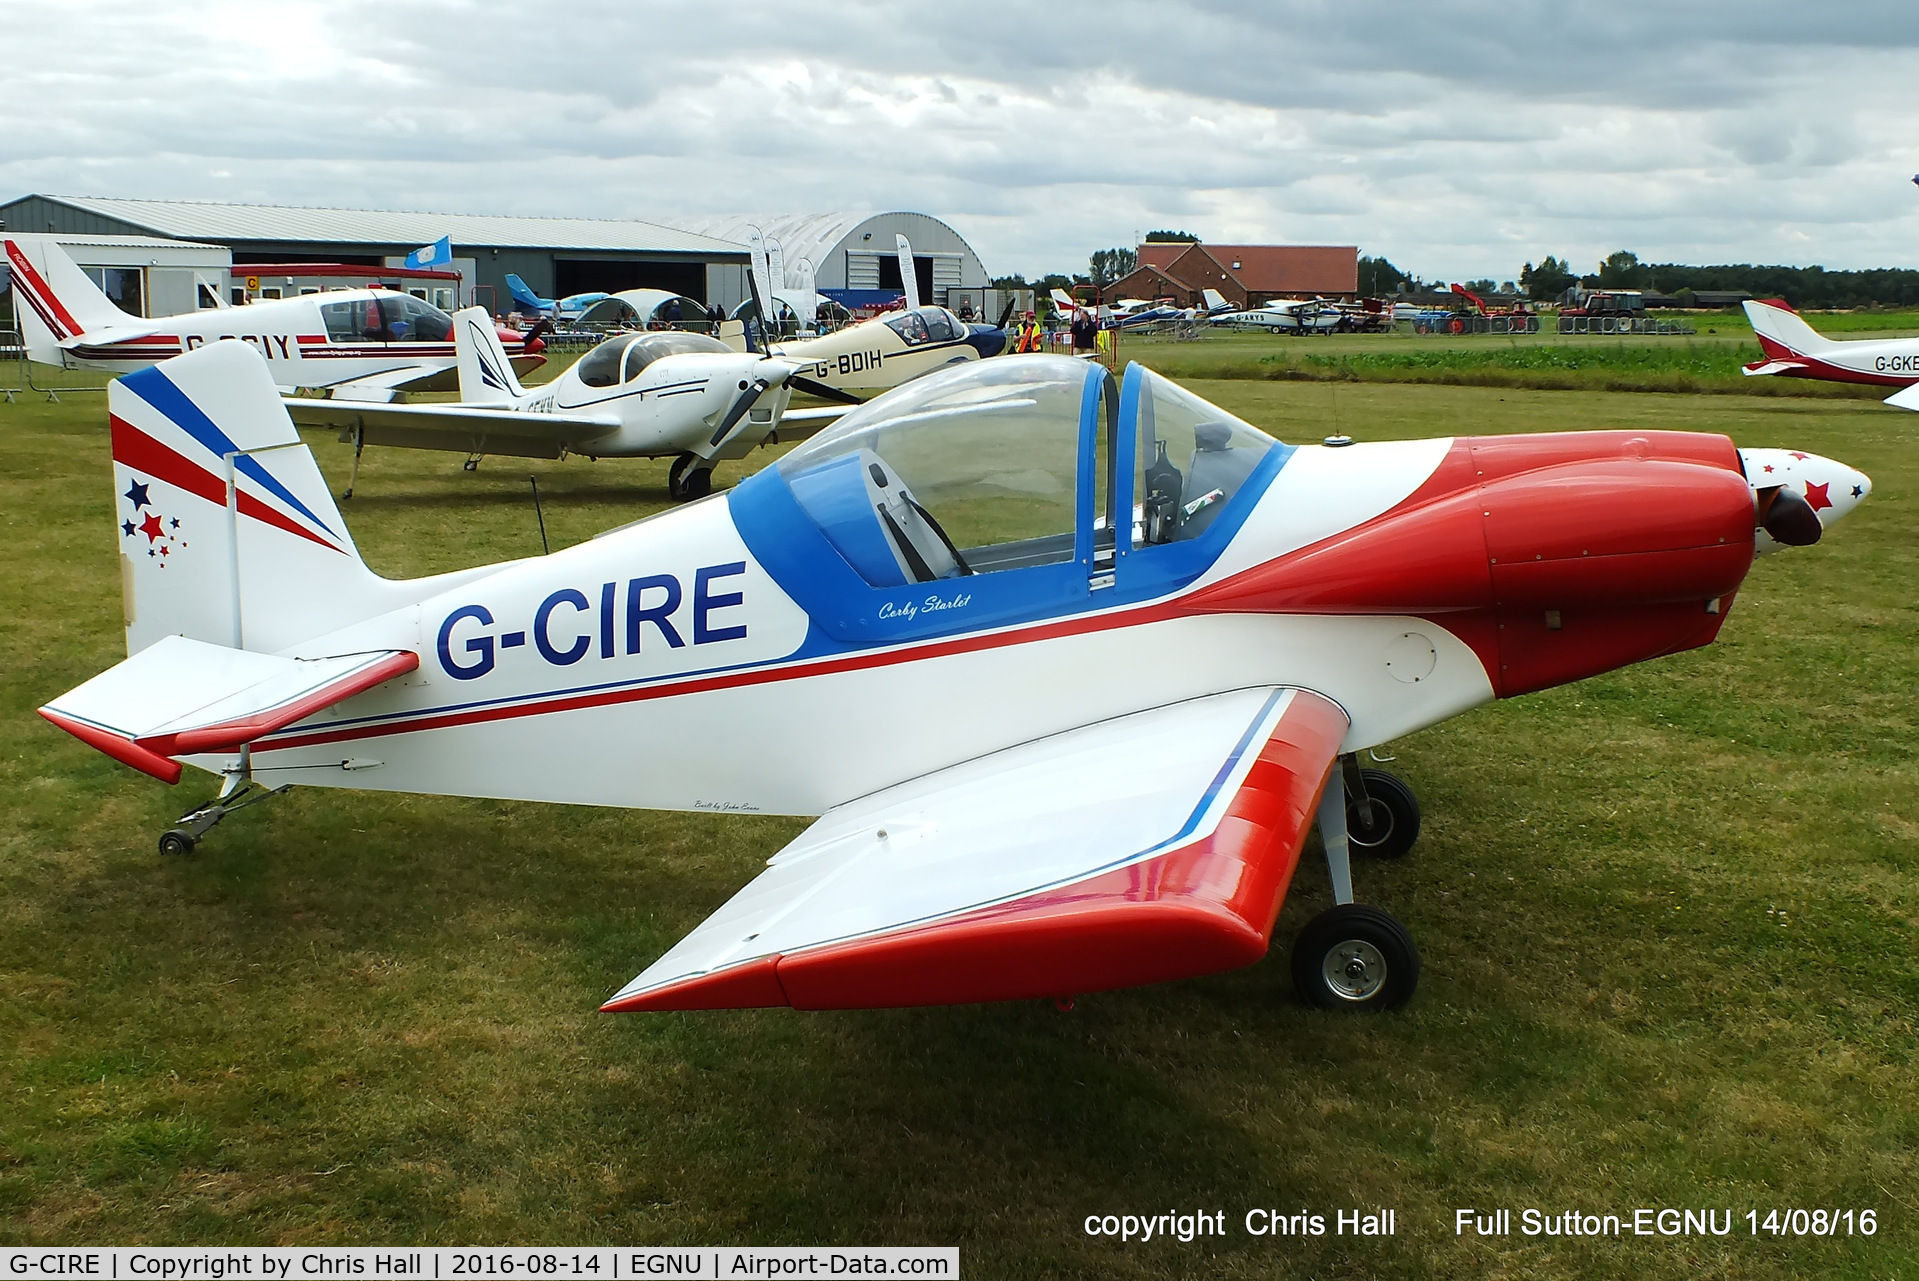 G-CIRE, 2015 Corby CJ-1 Starlet C/N LAA 134-14806, at the LAA Vale of York Strut fly-in, Full Sutton